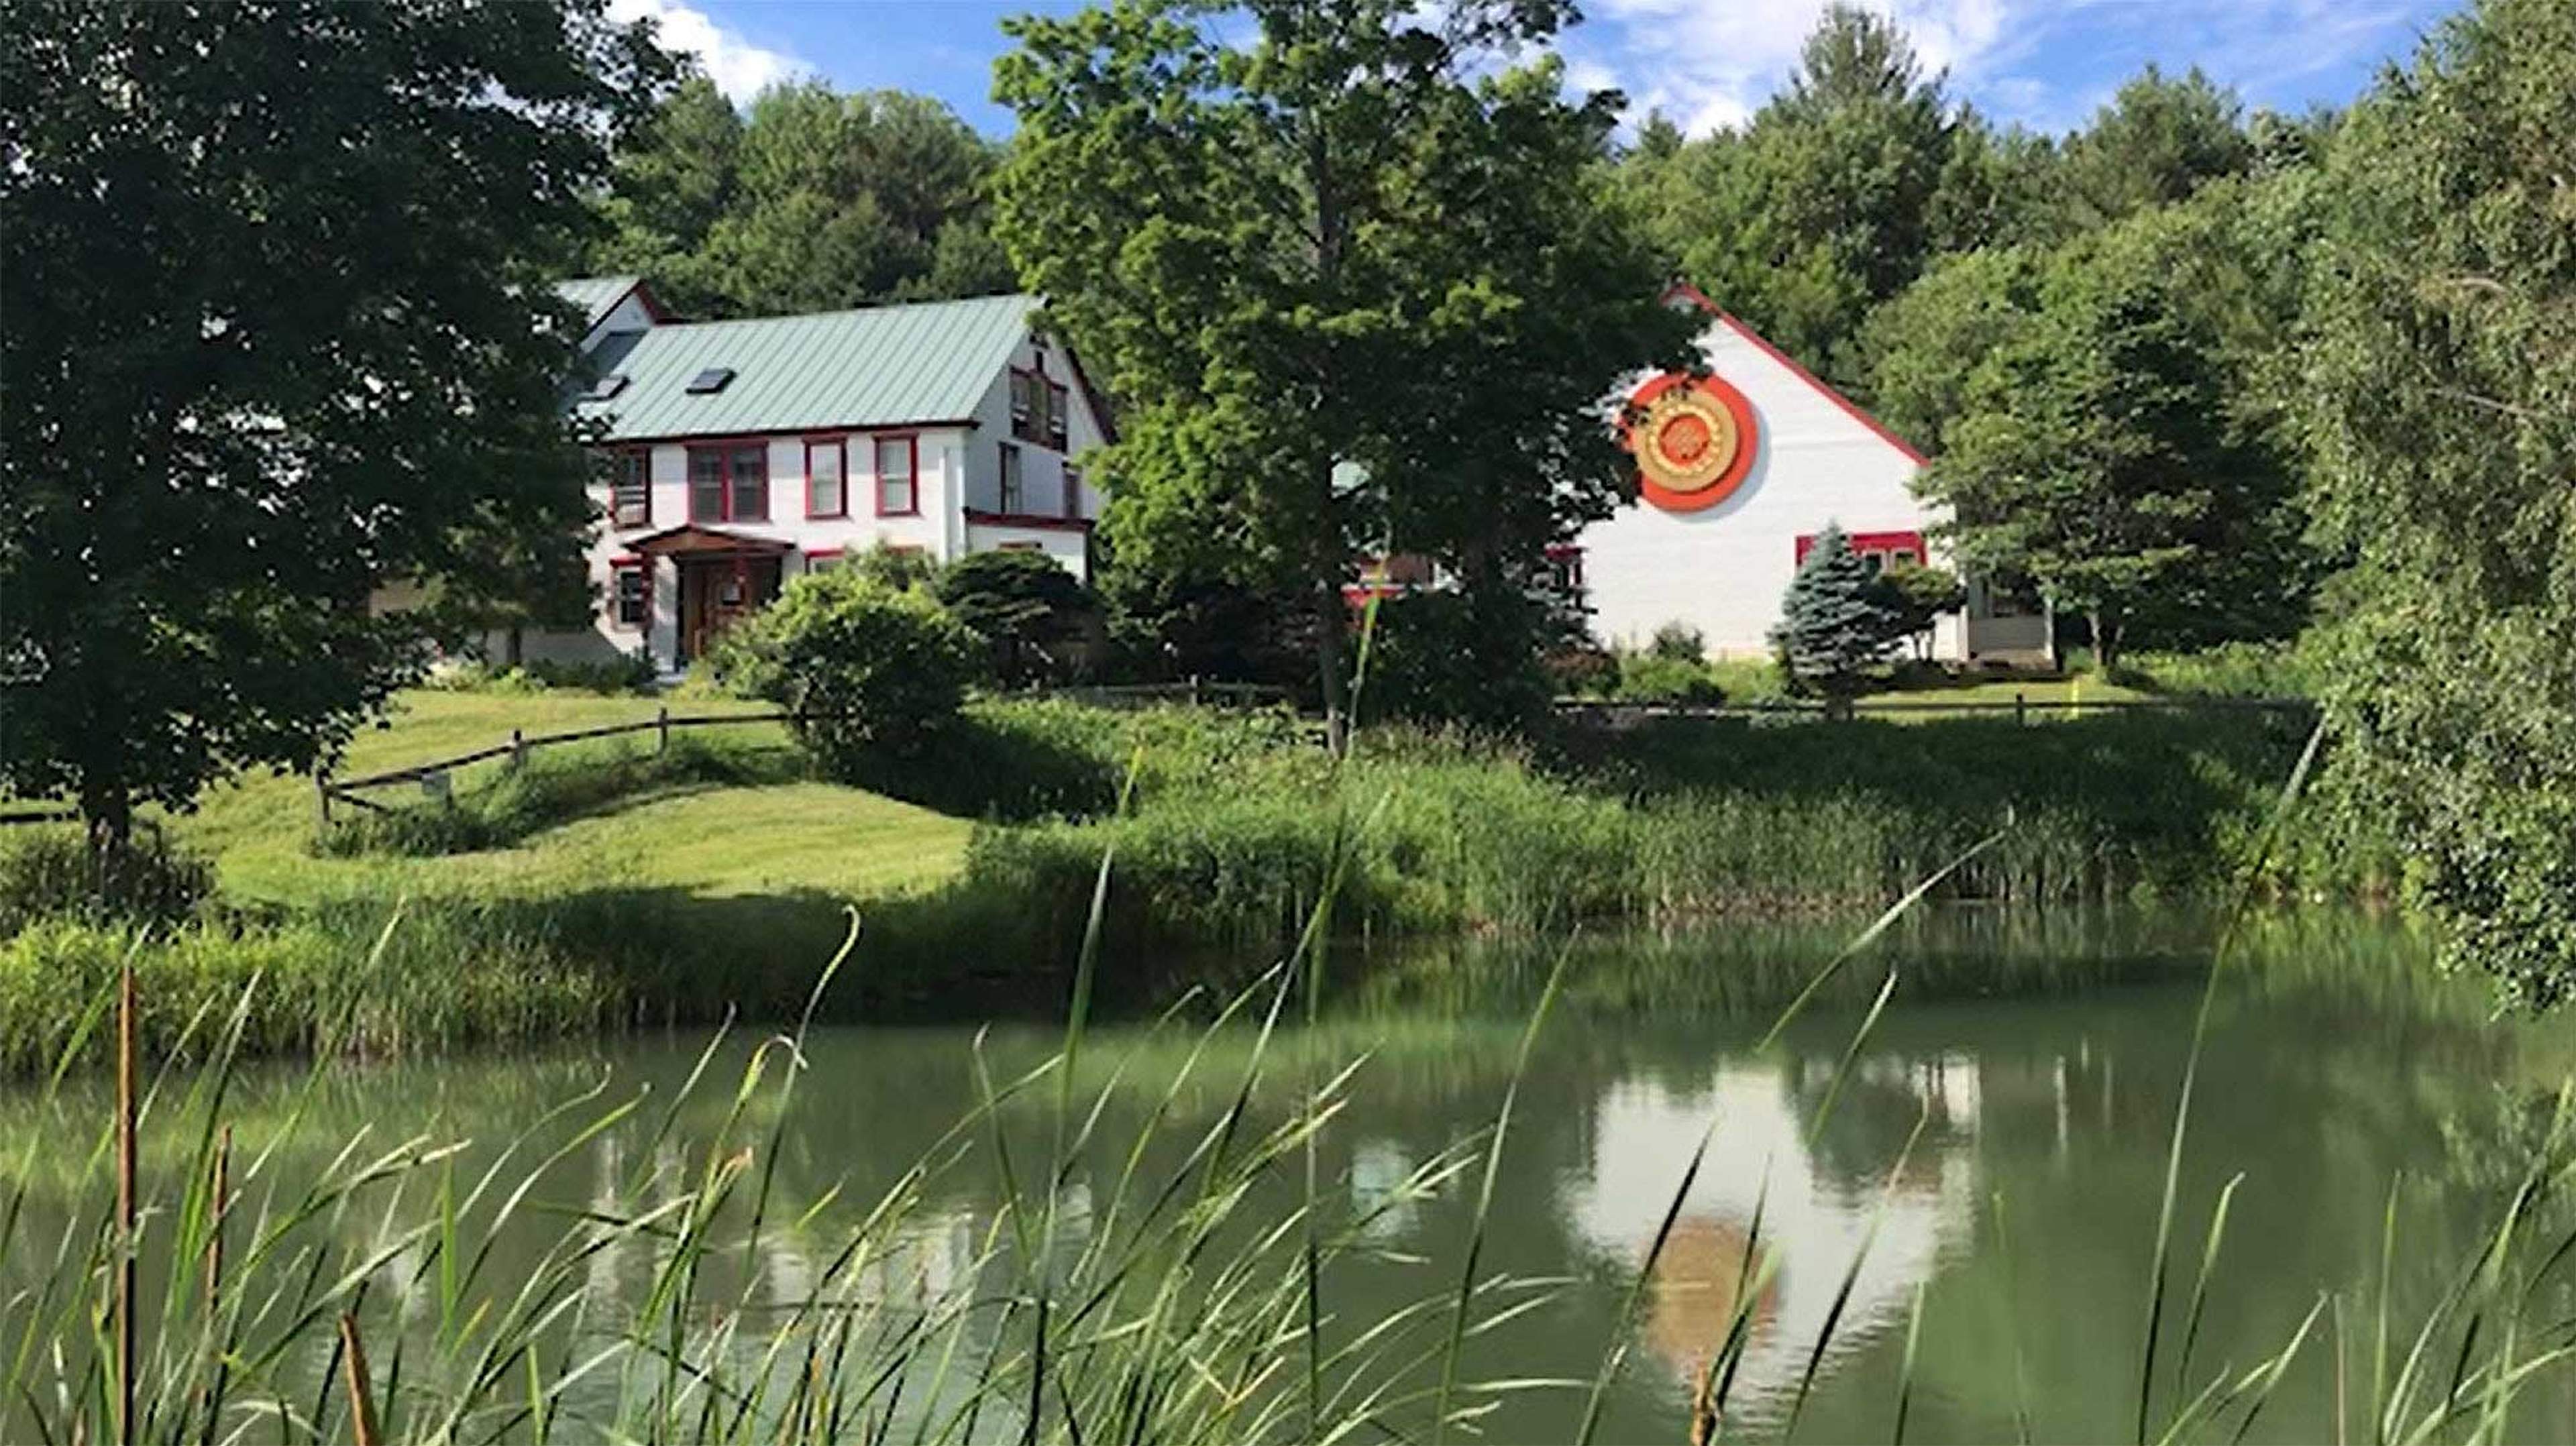 Learn about the community at Karme Choling Meditation Retreat Center in Vermont.